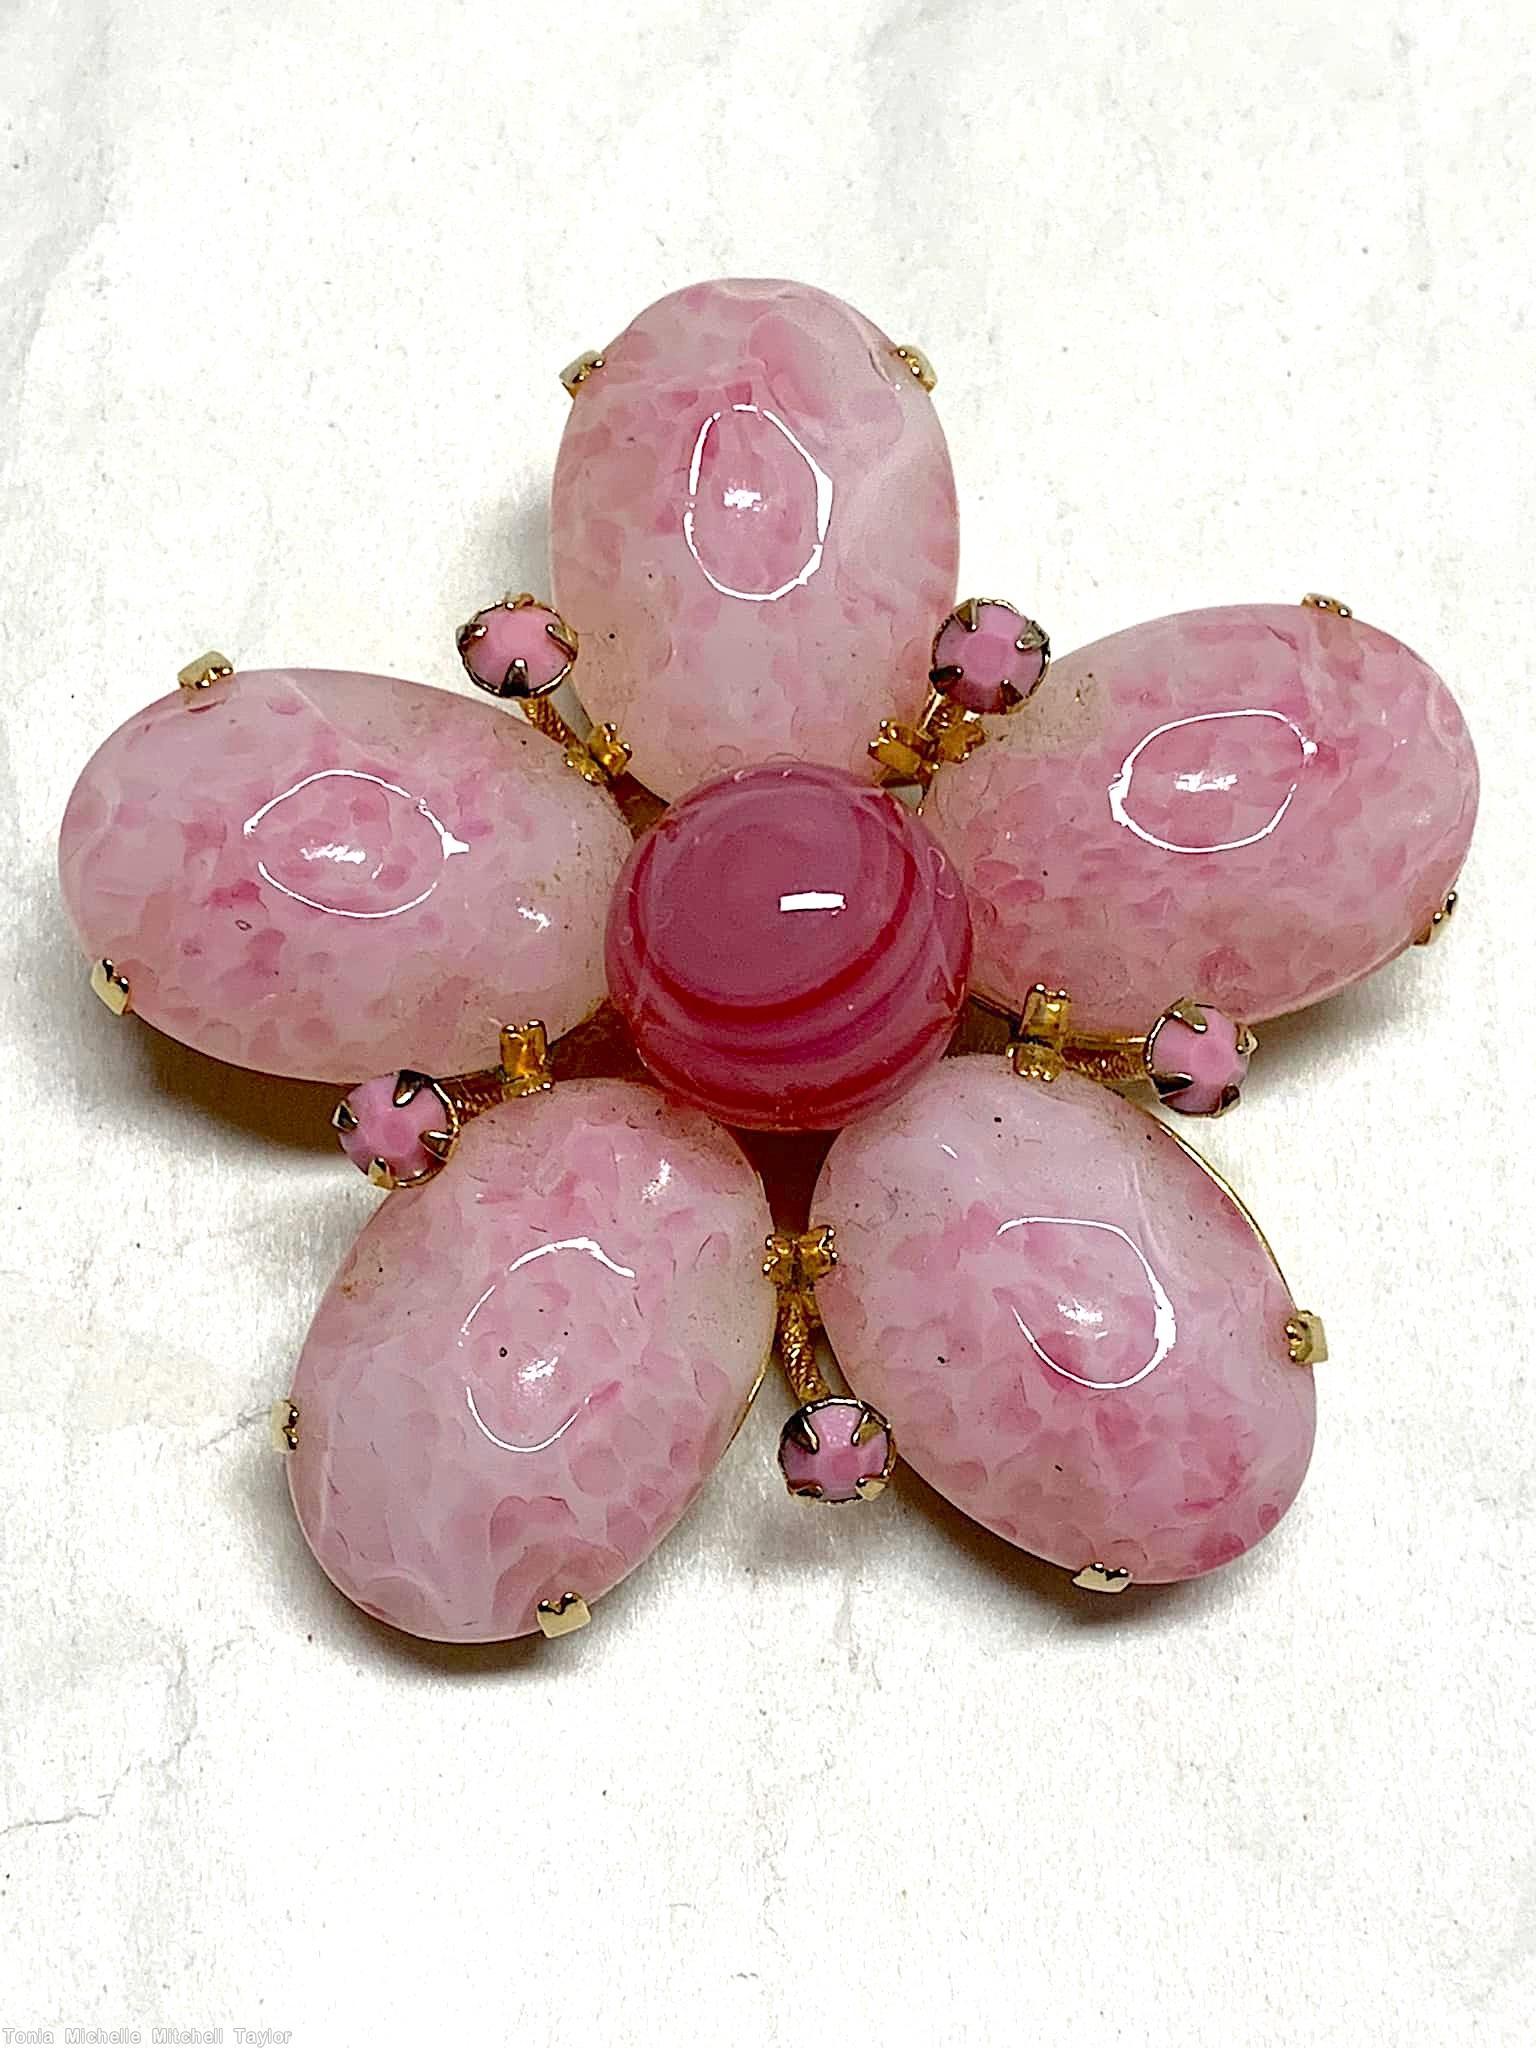 Schreiner 5 large oval cab 5 small chaton branch radial pin large chaton center pale pink marbled moon rock large oval art glass fuschia marble bubble opaque pink small chaton goldtone jewelry